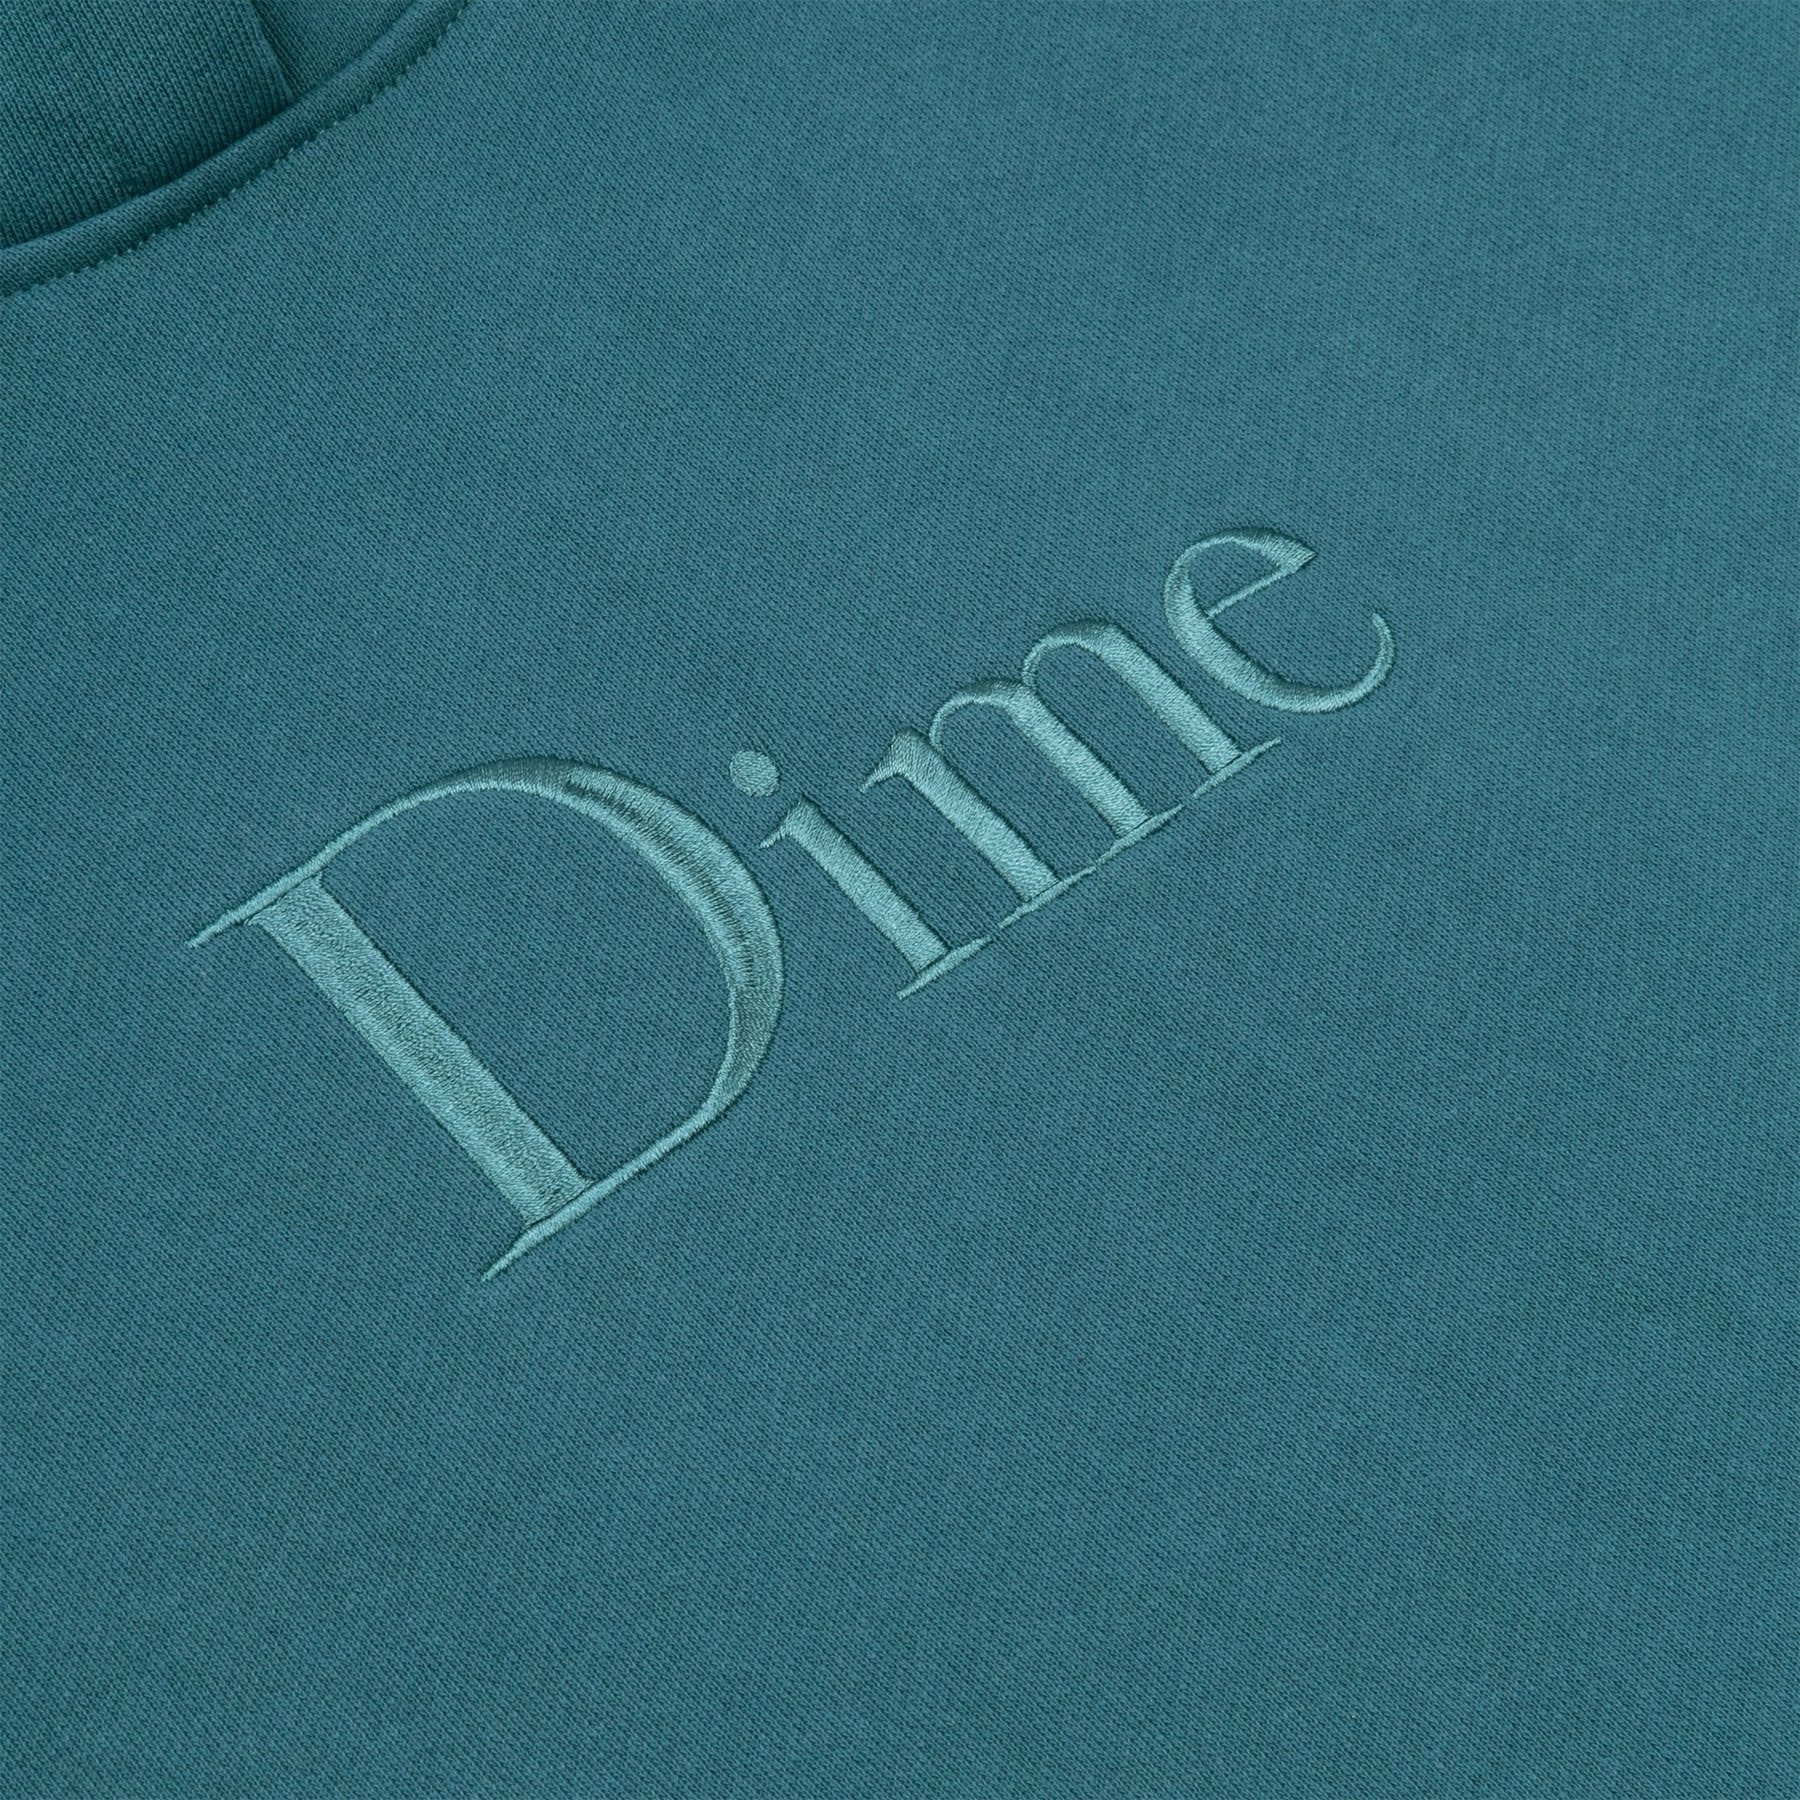 Dime Classic Embroidered Hoodie - Homegrown